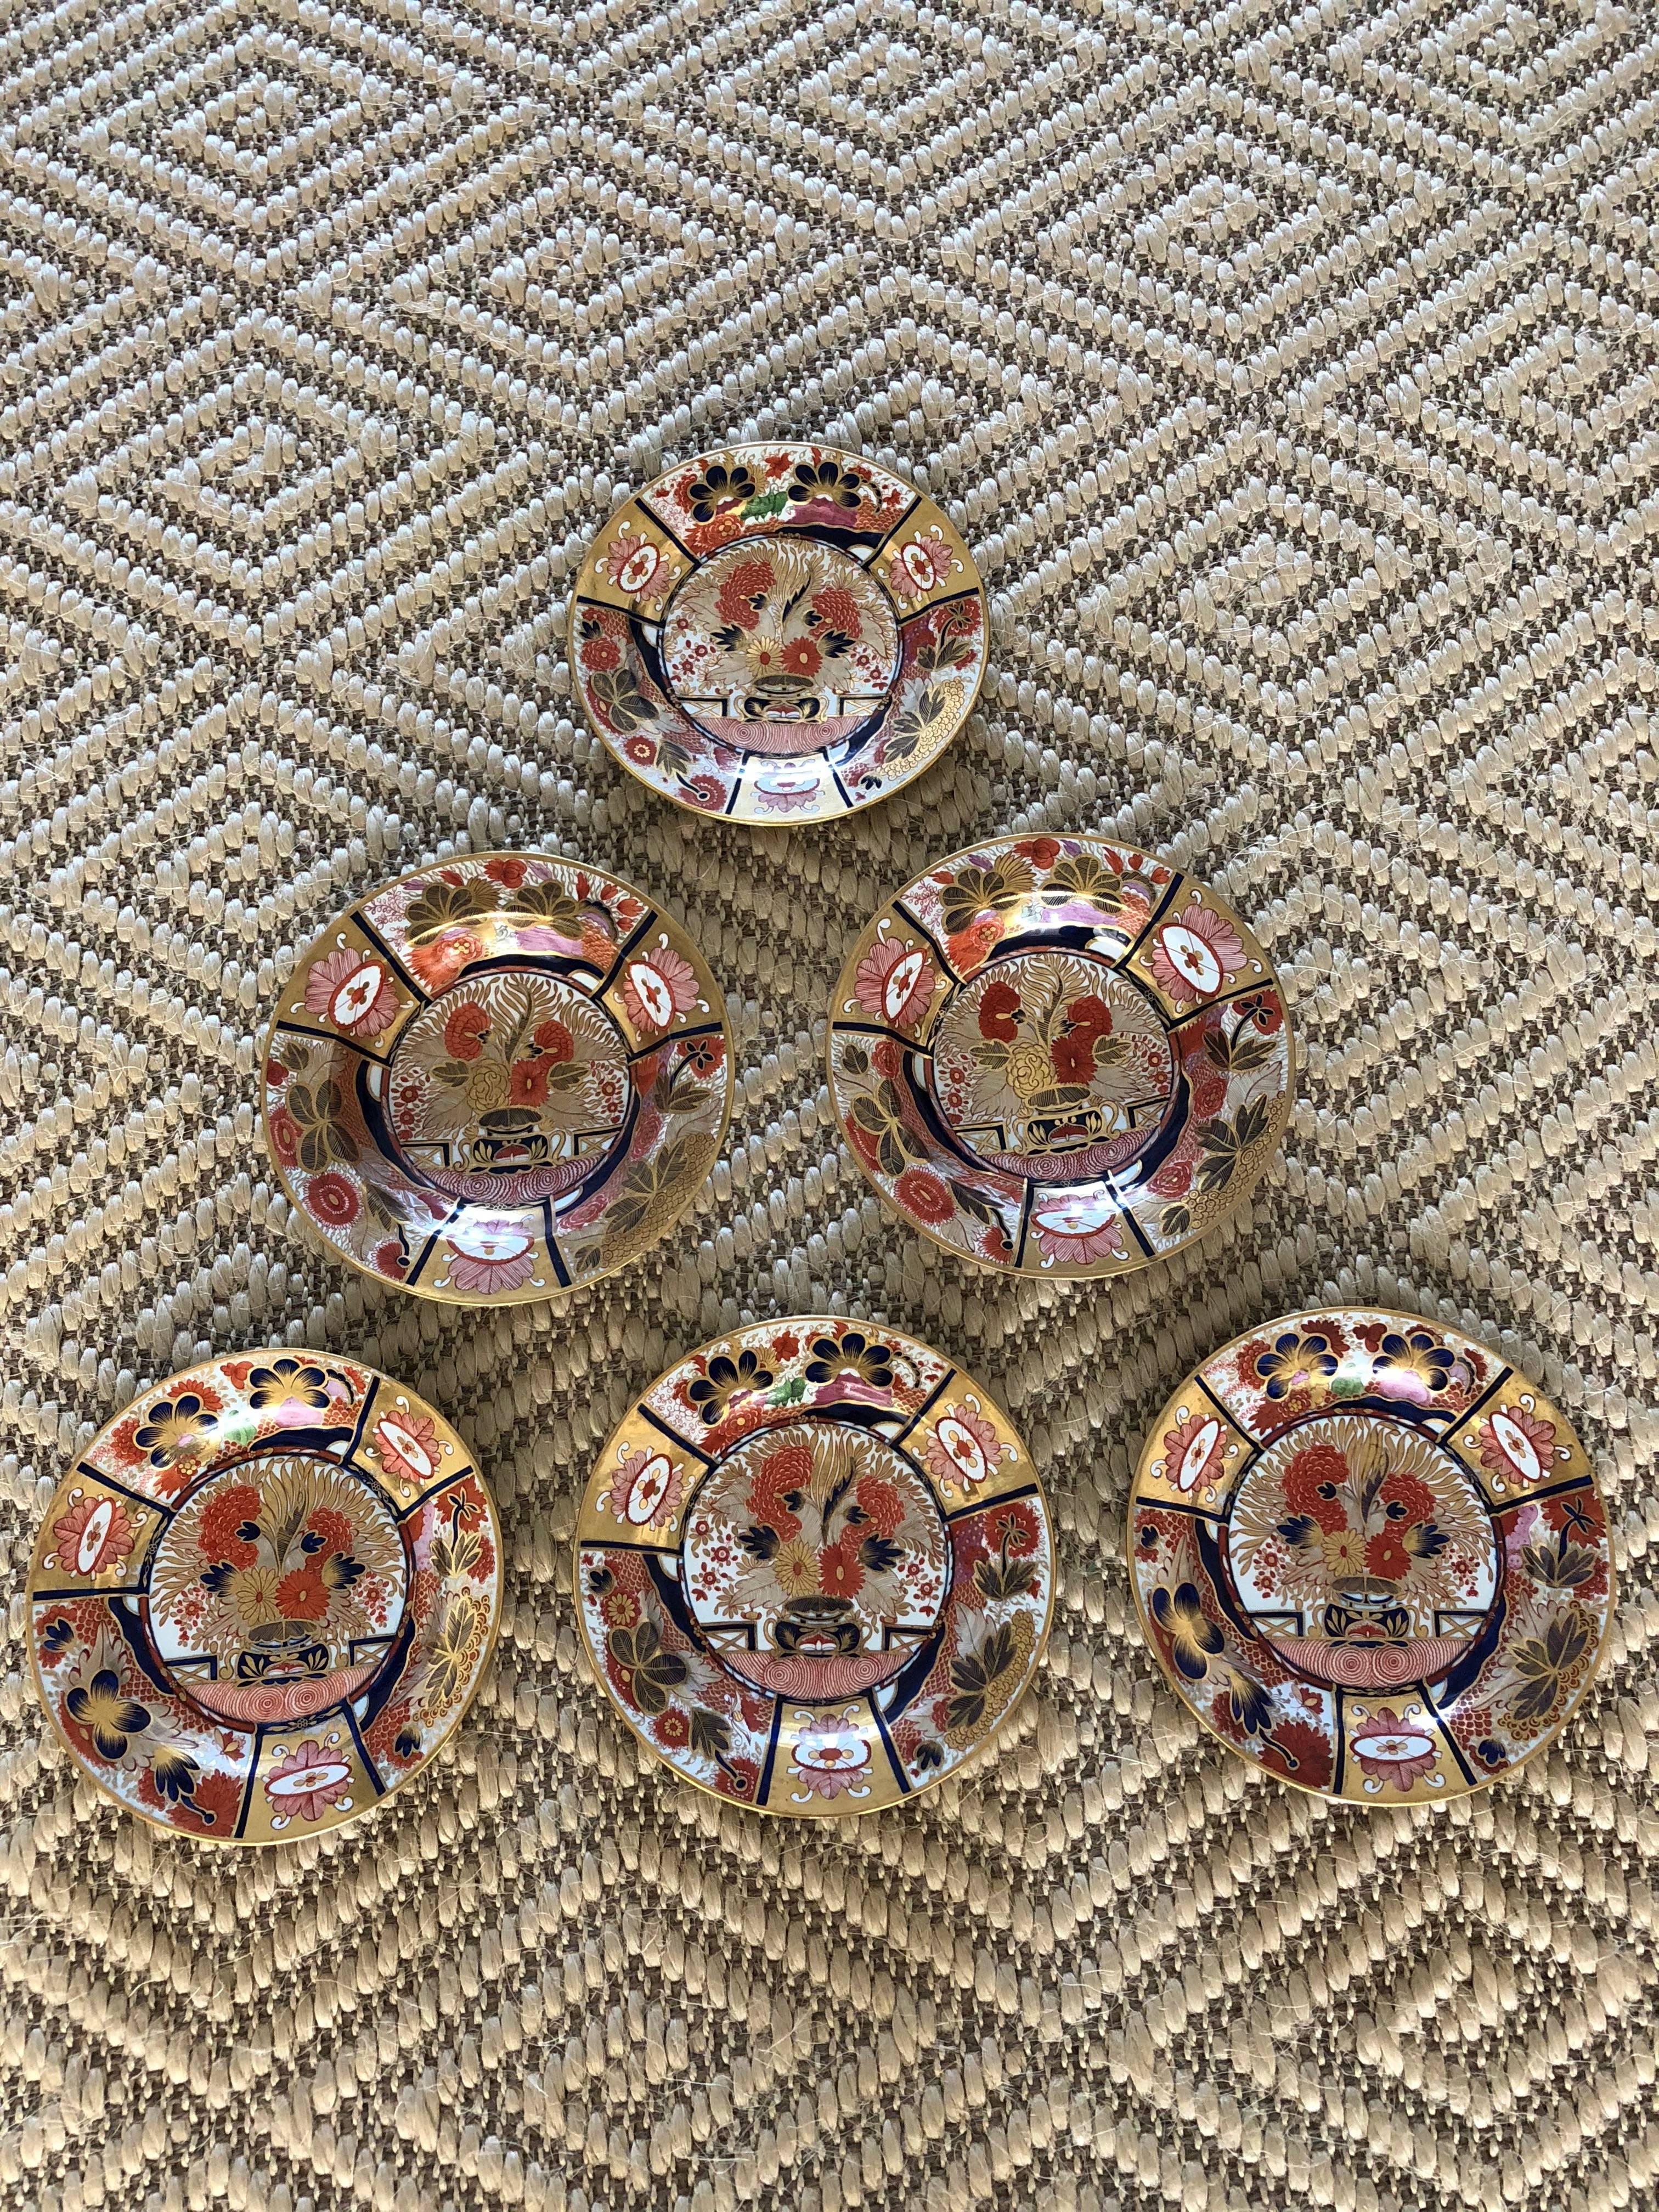 This suite is of two bowls and four plates early 19th century Chamberlain's Worcester Porcelain dishes, circa 1804, decorated in underglaze blue and having enamel red and gold in the Imari style marked in purple thinking this is early Nelson Pattern.